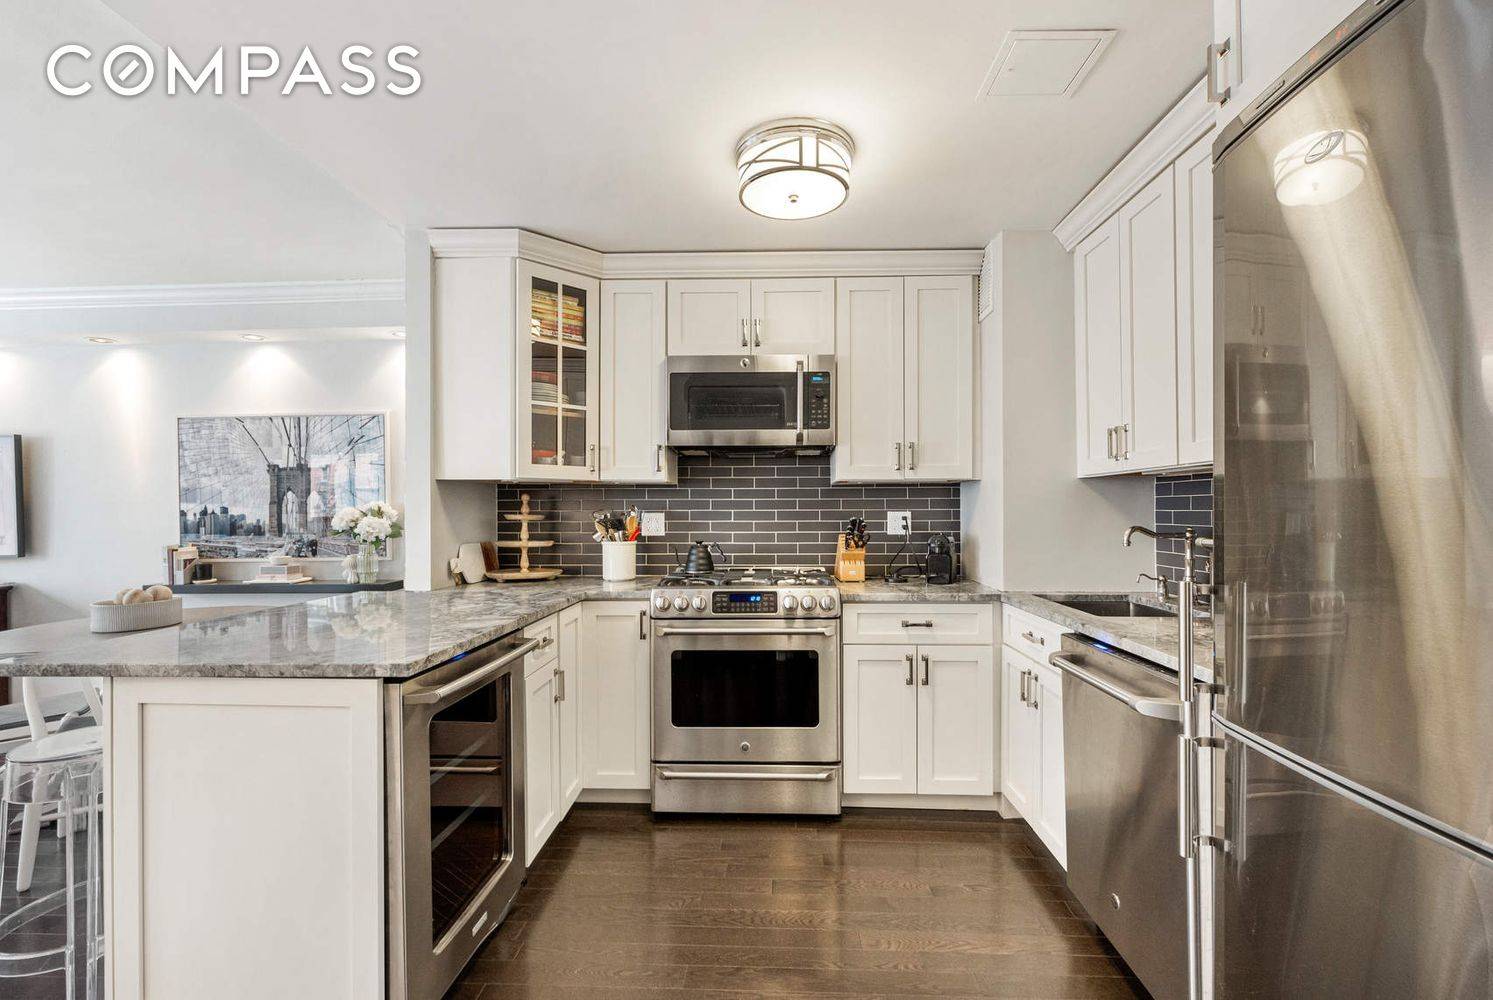 Welcome to Residence 5F, an exceptional 1 bedroom, 1 bathroom apartment now available for immediate occupancy pending board approval at the Peter James Cooperative in the heart of Kips Bay ...